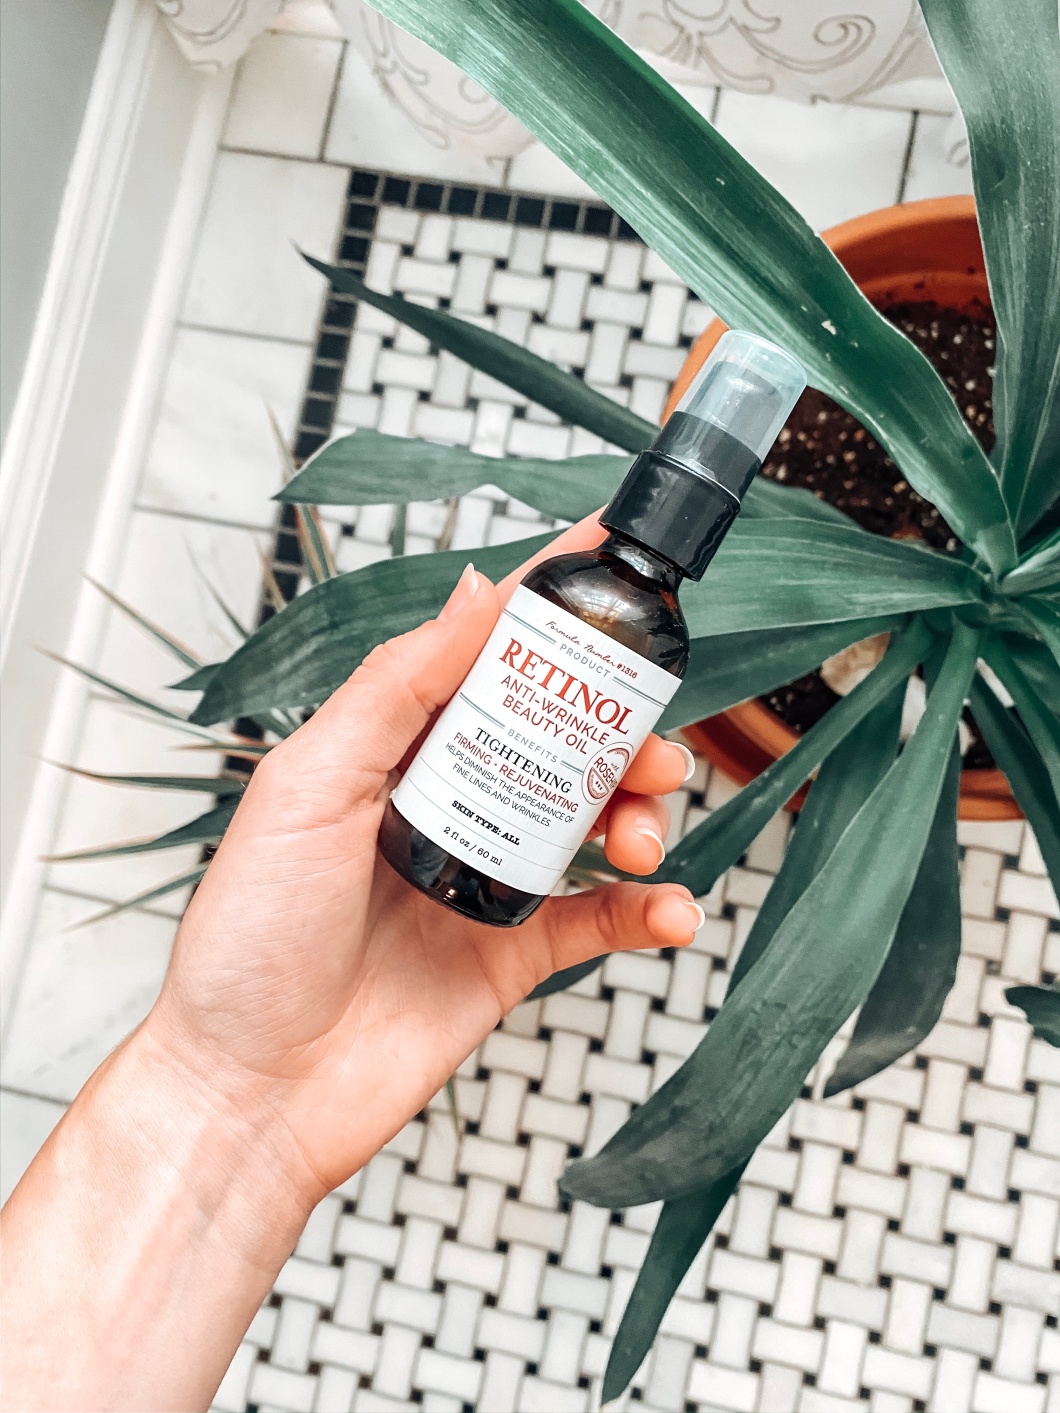 Image of Candace's hand holding a bottle of Retinol Oil over plants and black and white marble tile.